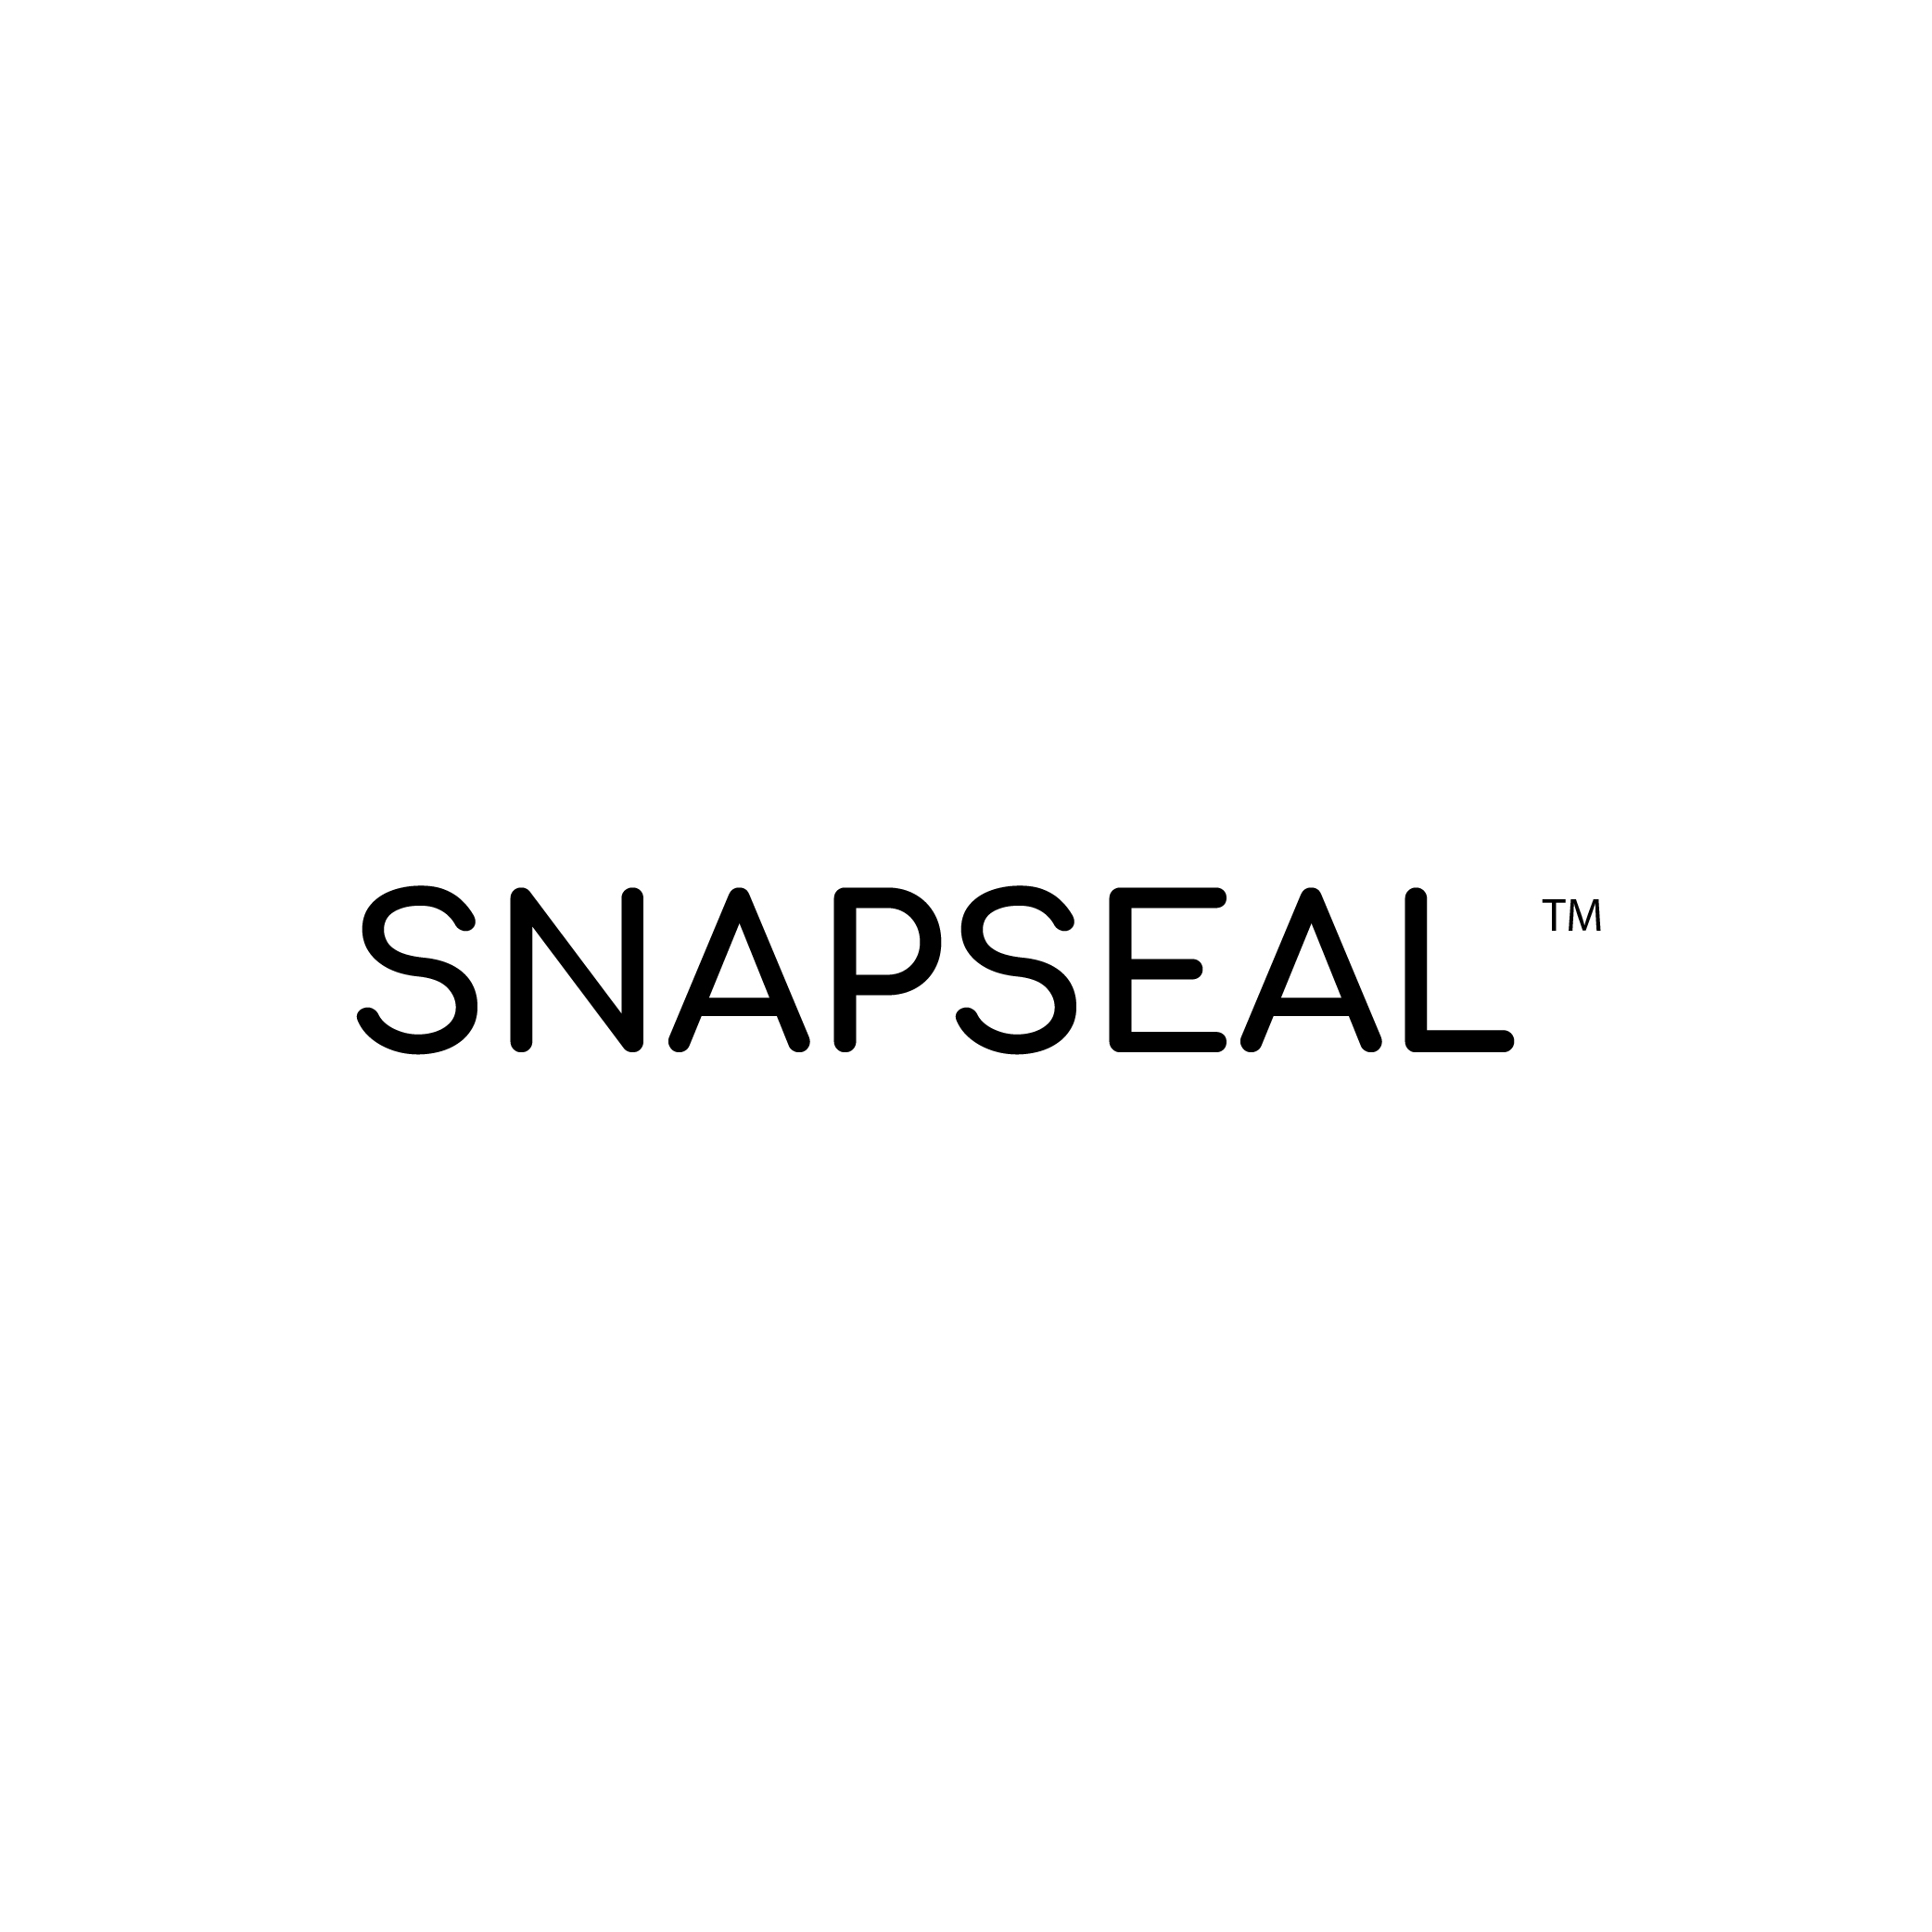 Snapseal